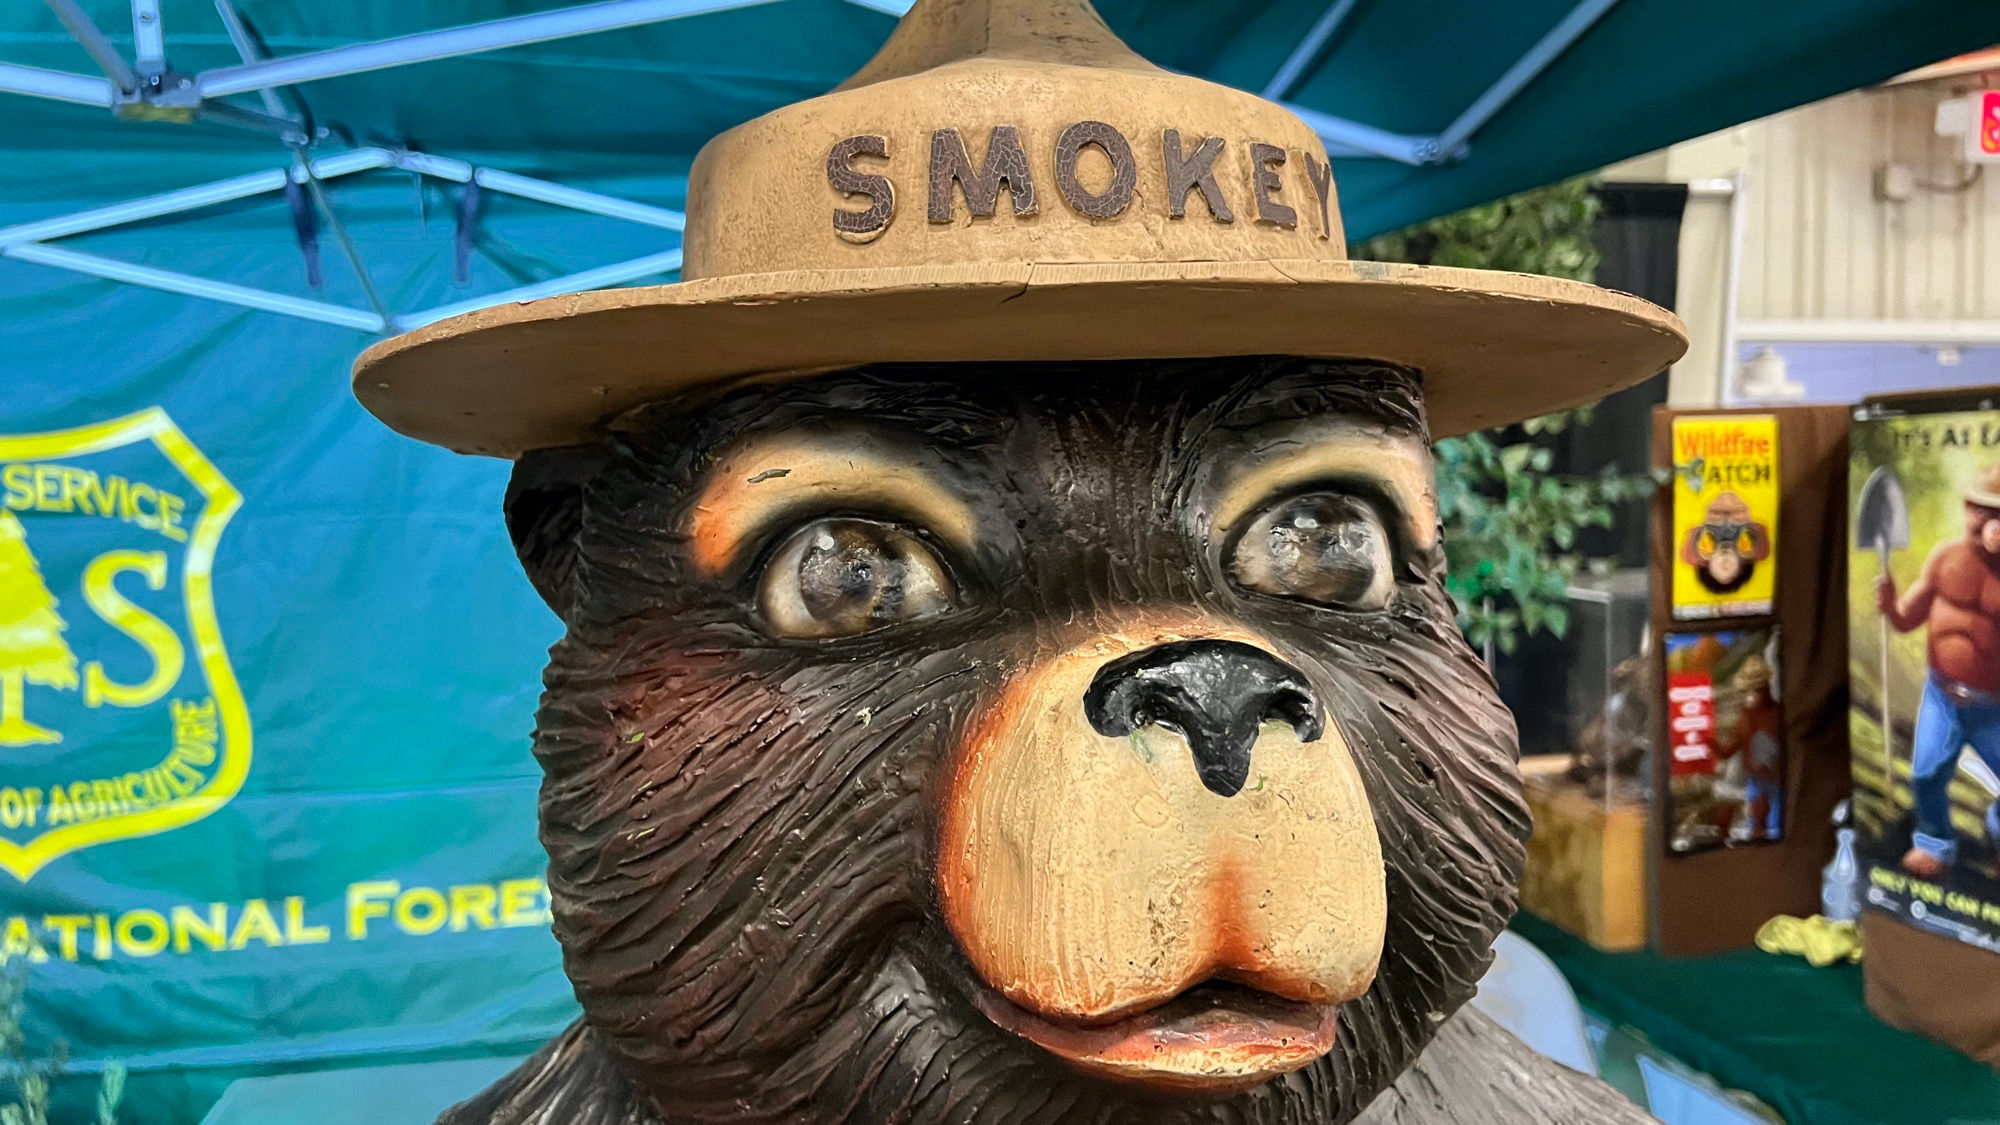 Los Padres National Forest Smokey the Bear